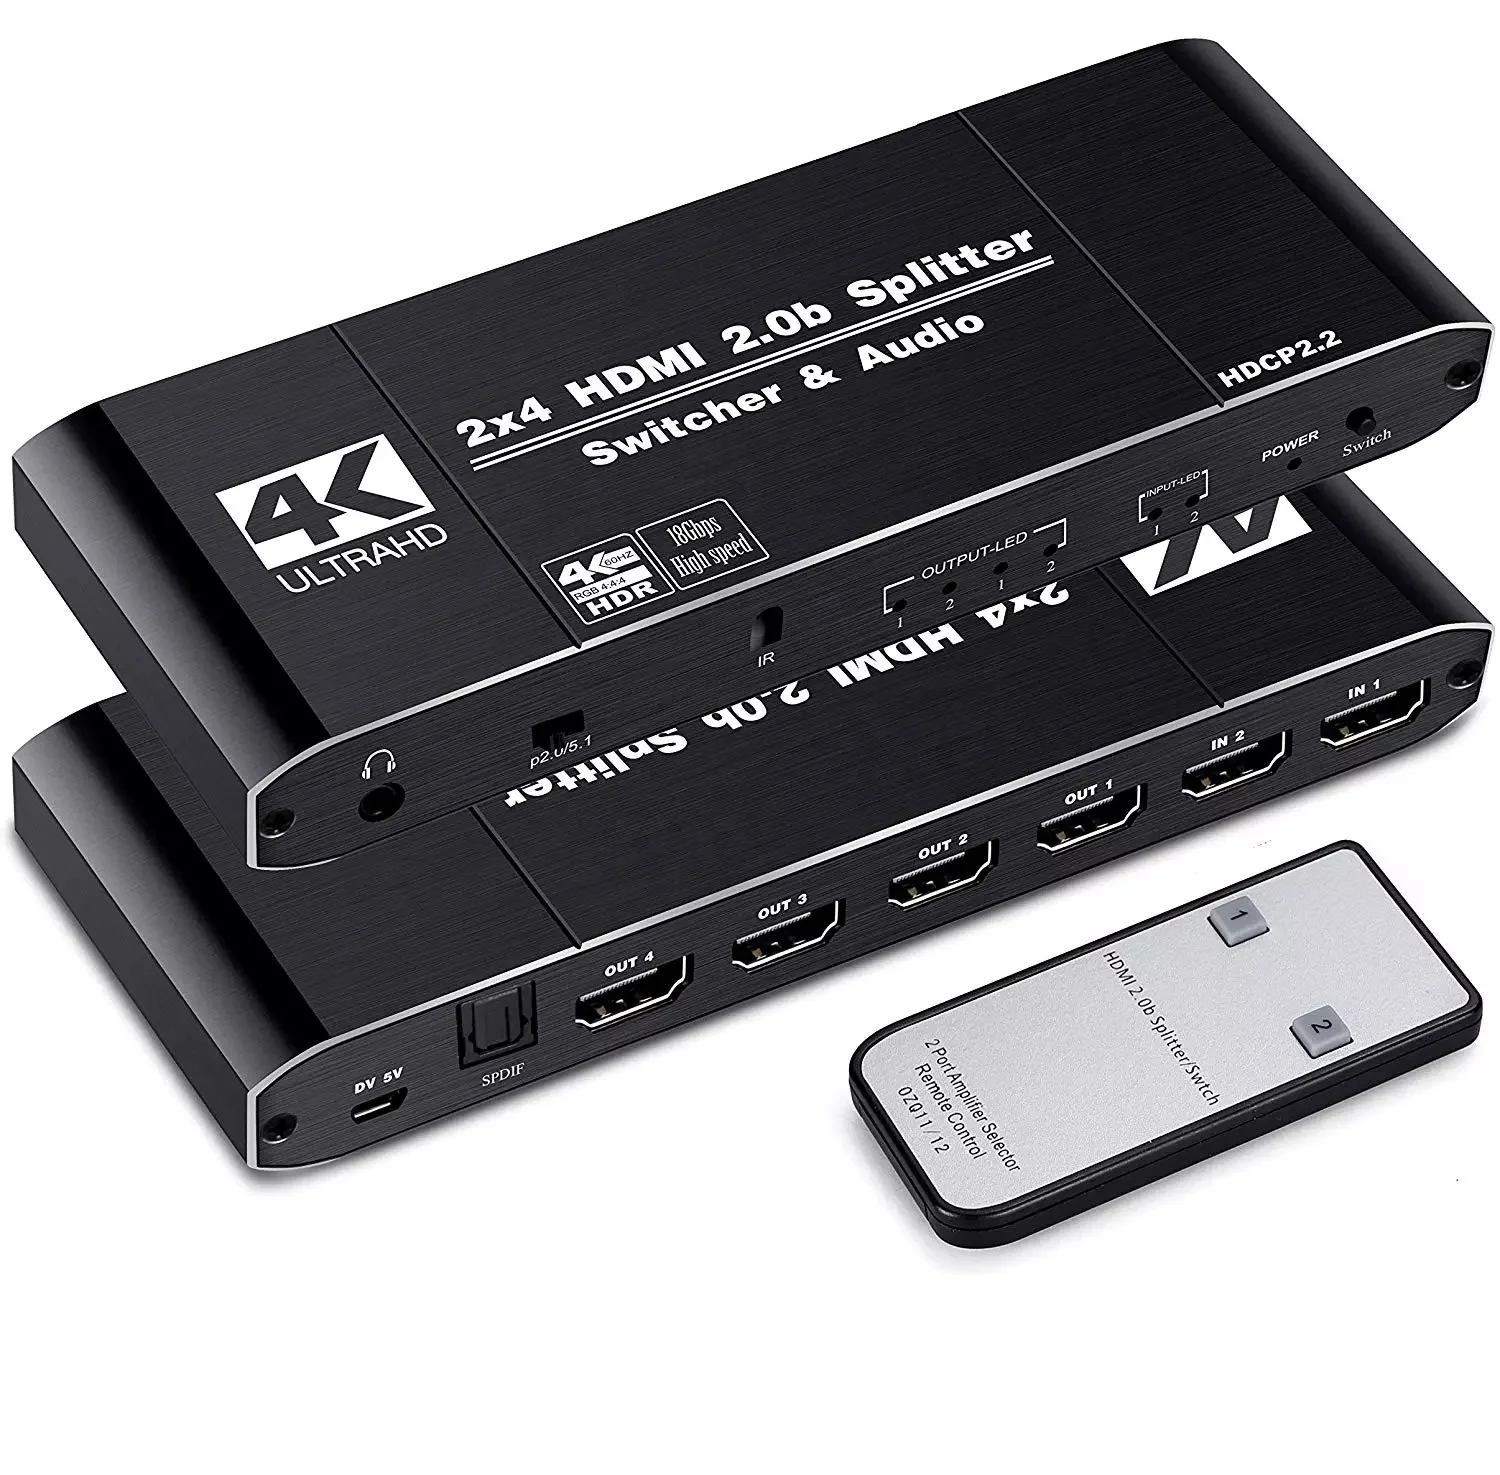 

OZQ12 4K@60Hz 2x4 HDMI 2.0B Switch Splitter Switcher SPDIF Audio 3.5mm & Scaler 2 in 4 out with Remote Support 4K 3D HDCP2.2, Black